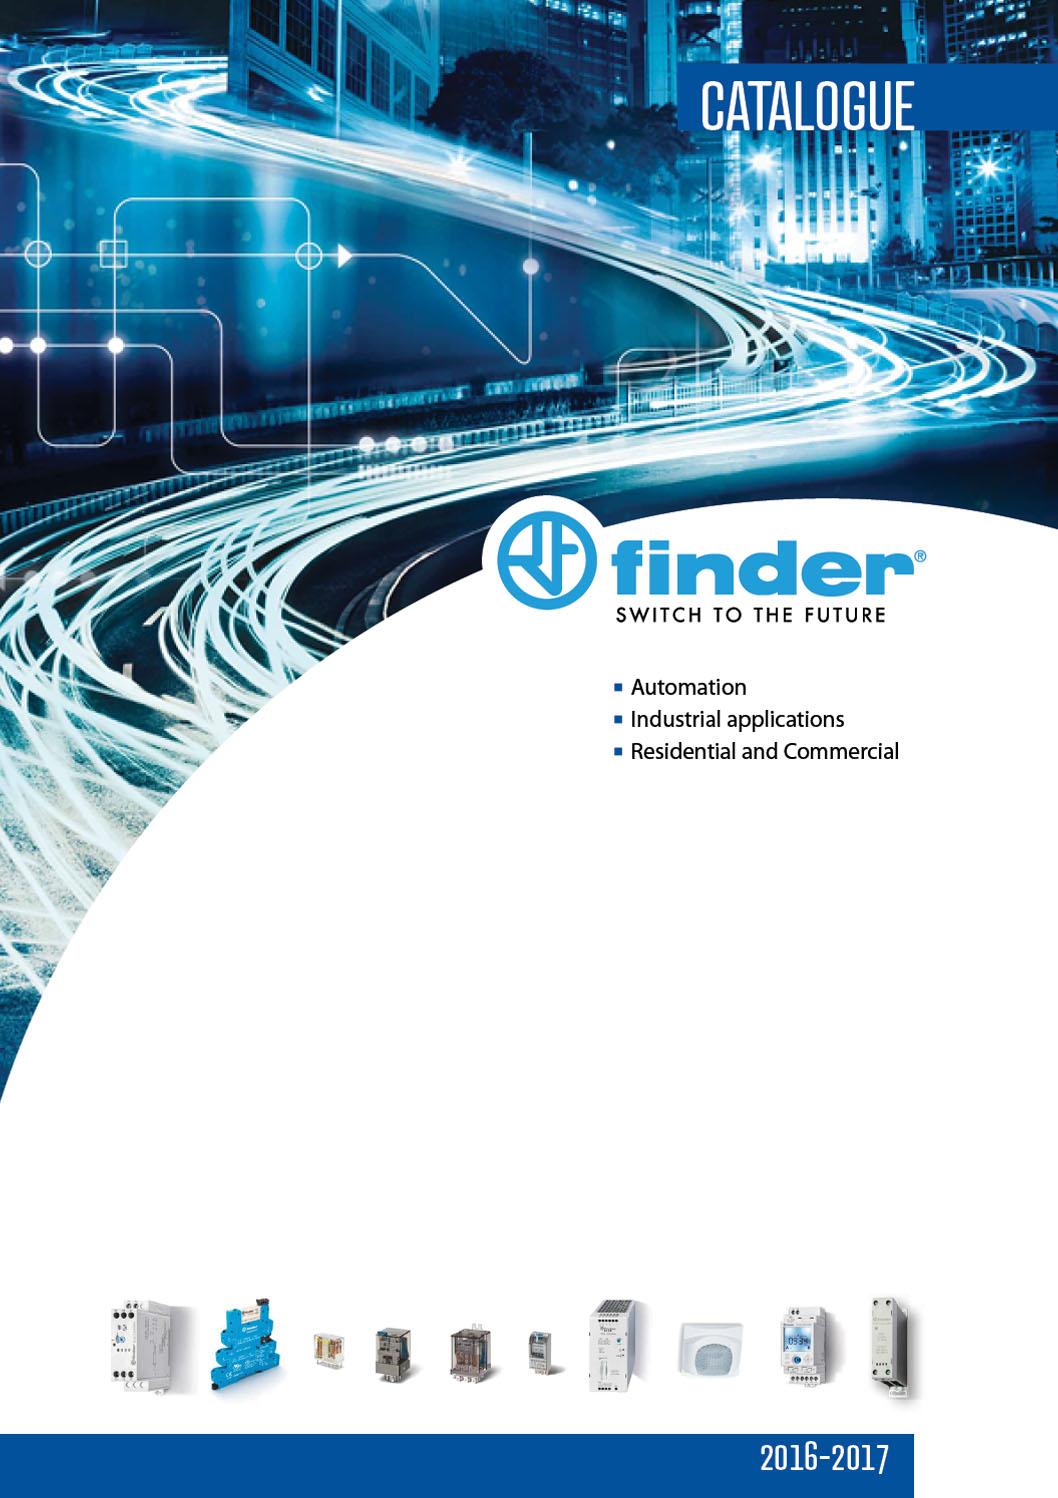 Finder Catalogue supplied by ElectroMechanica